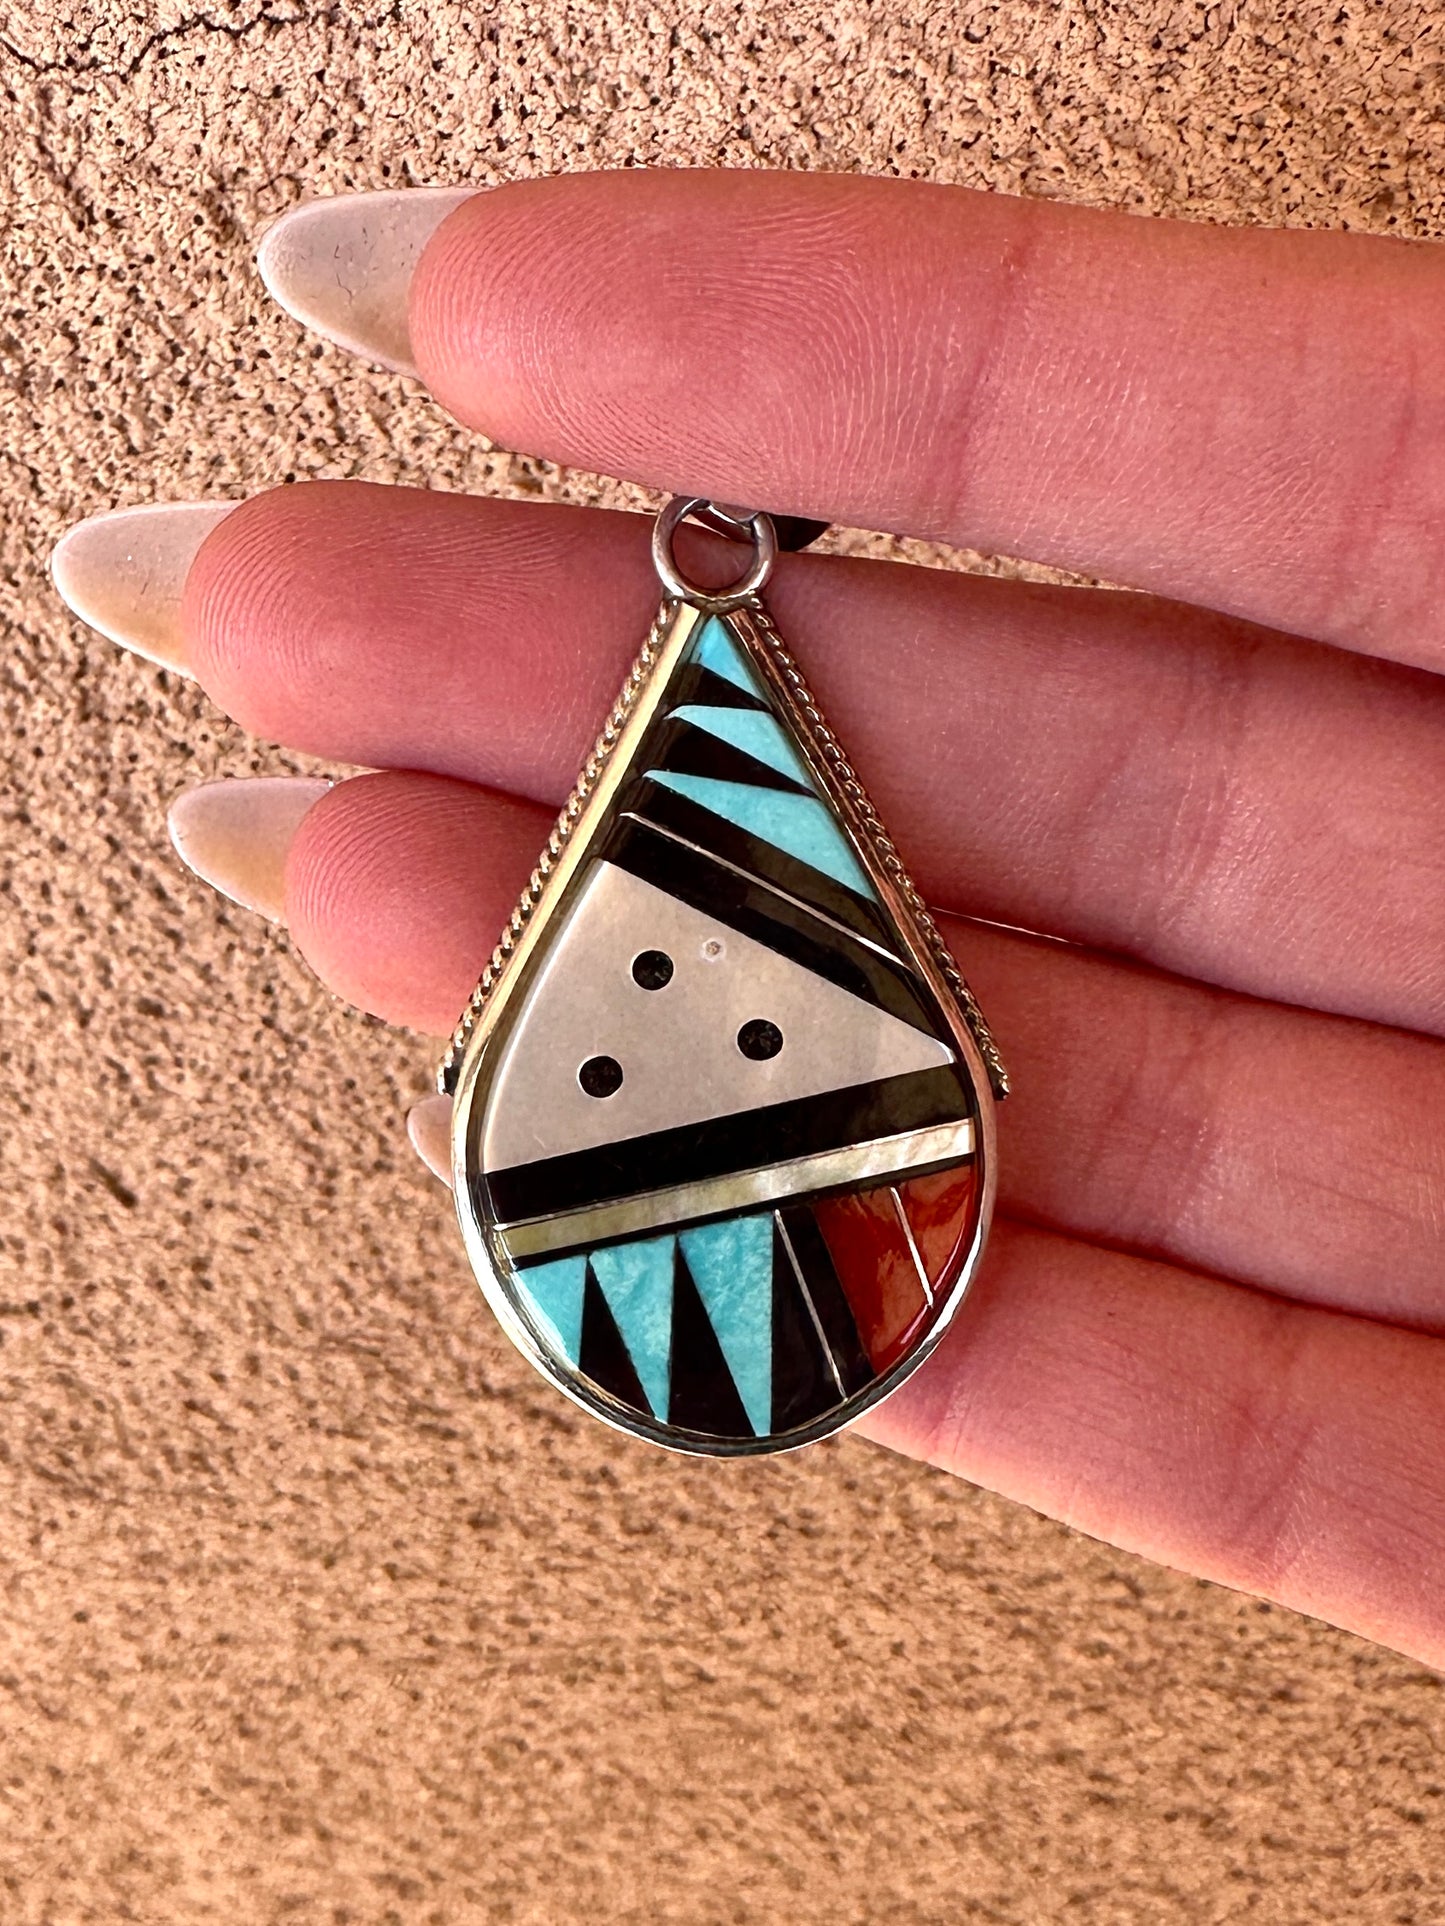 The Tribal Pendant from Rodgers Collection